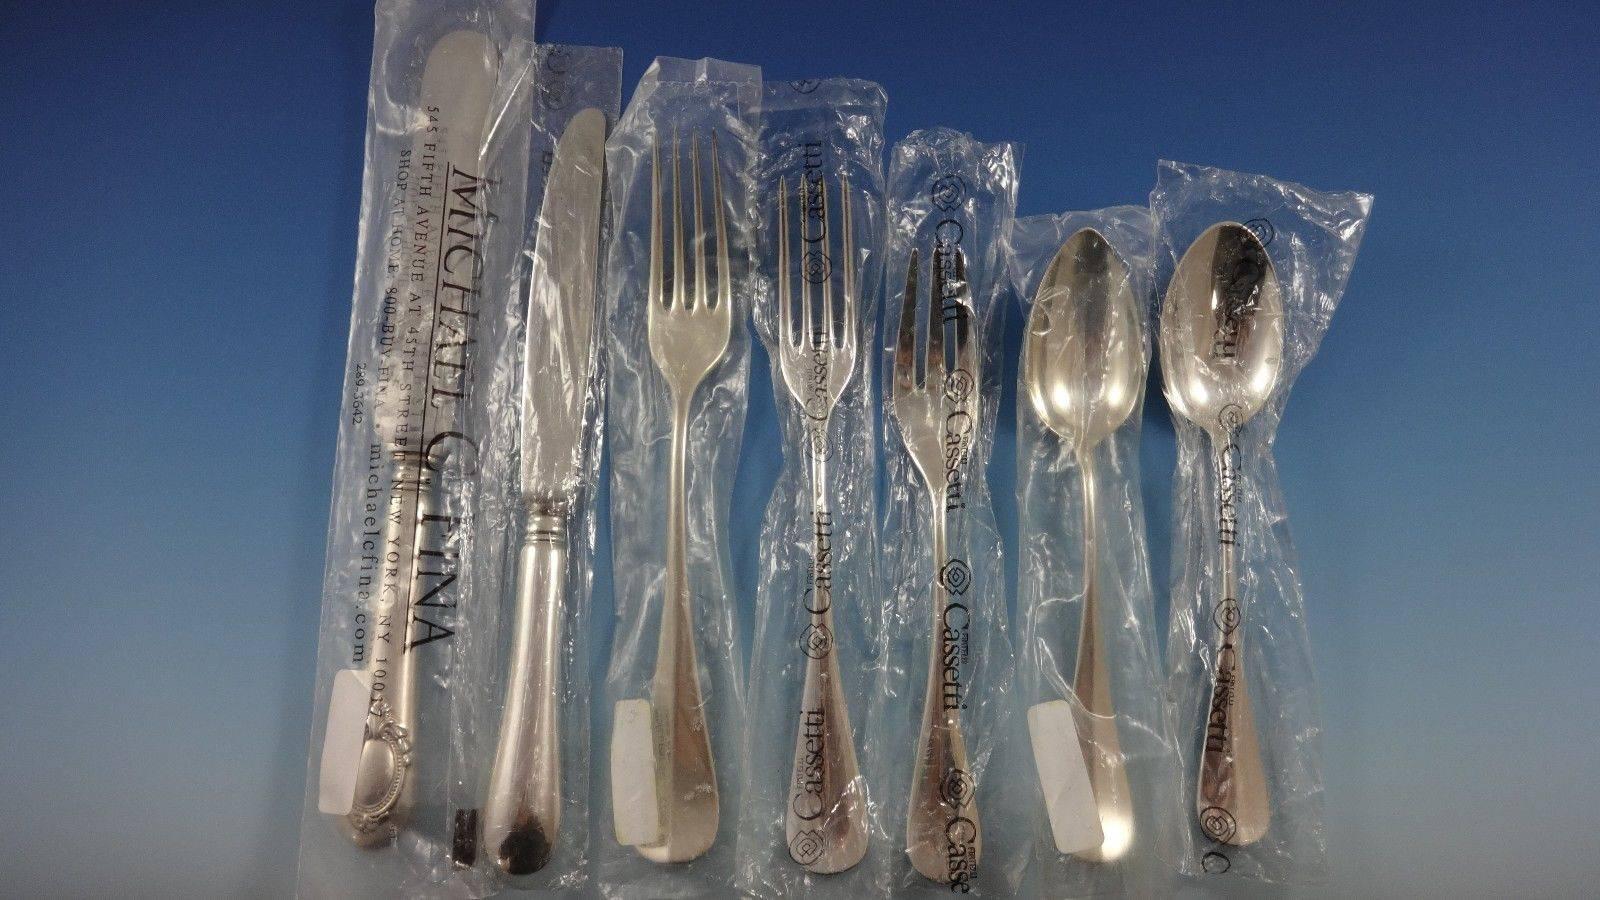 Beautiful Medallion by Cassetti sterling silver flatware set of 43 pieces. This pattern features a plain front and a medallion on the reverse. The pieces are large and heavy. This set includes:

Five dinner size knives, 10